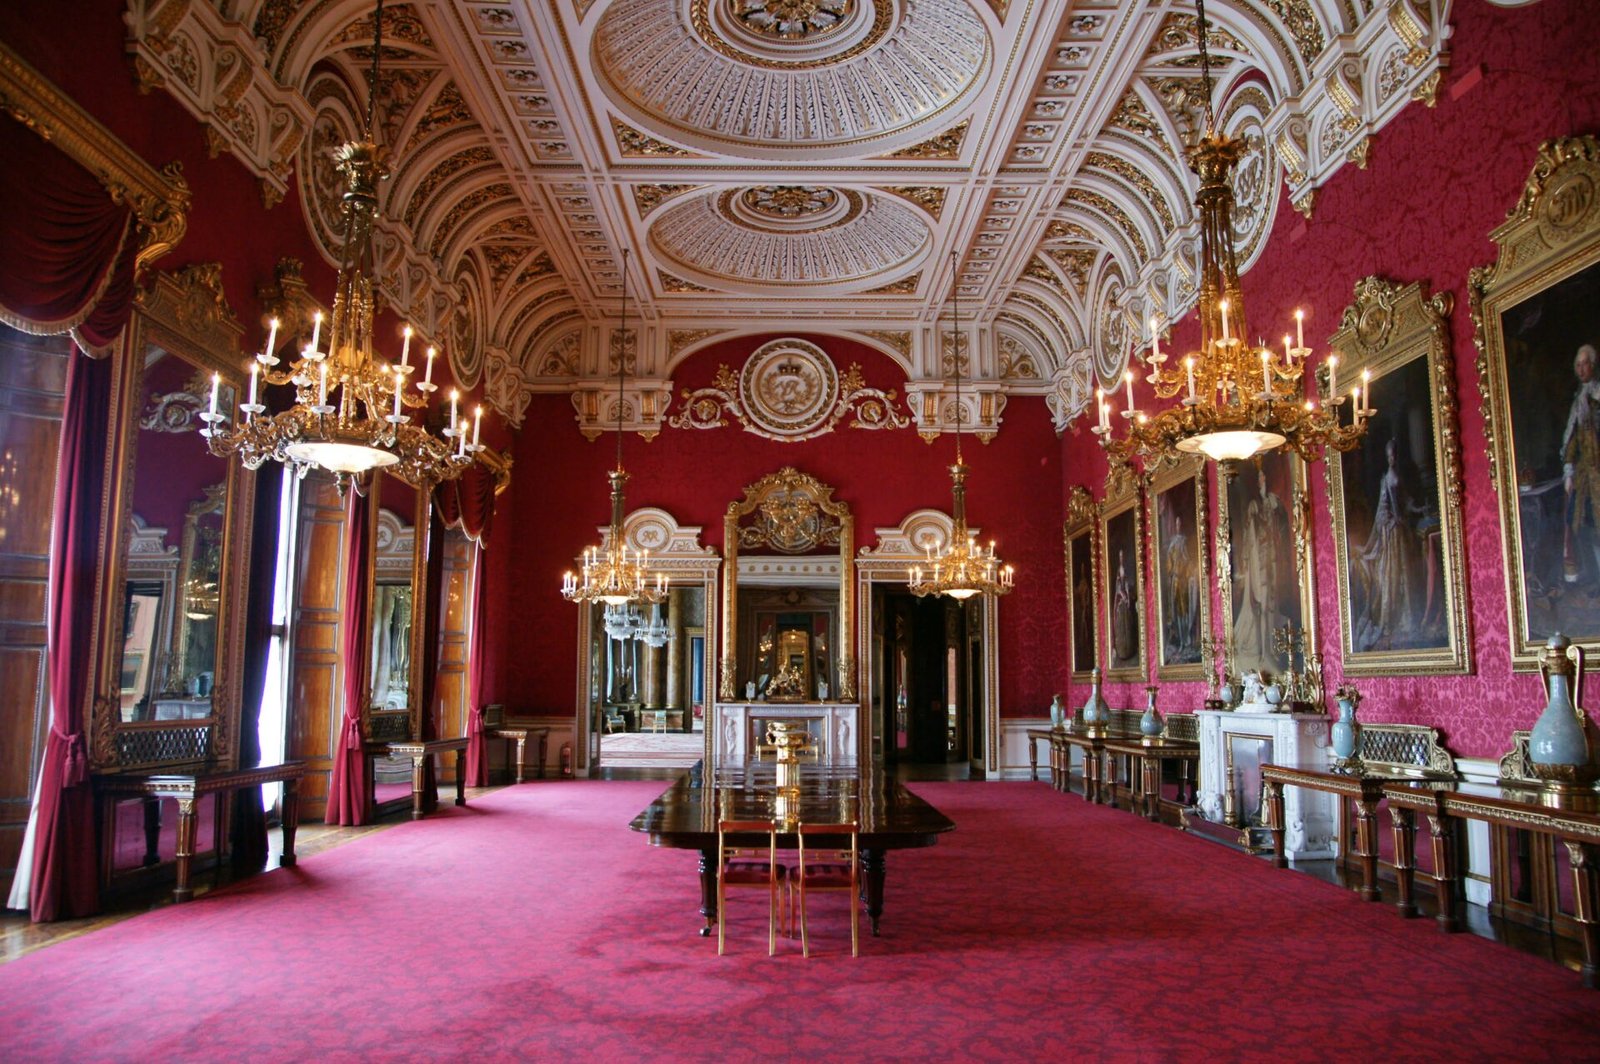 Buckingham Palace The State Dining Room is used by The Queen for official entertain